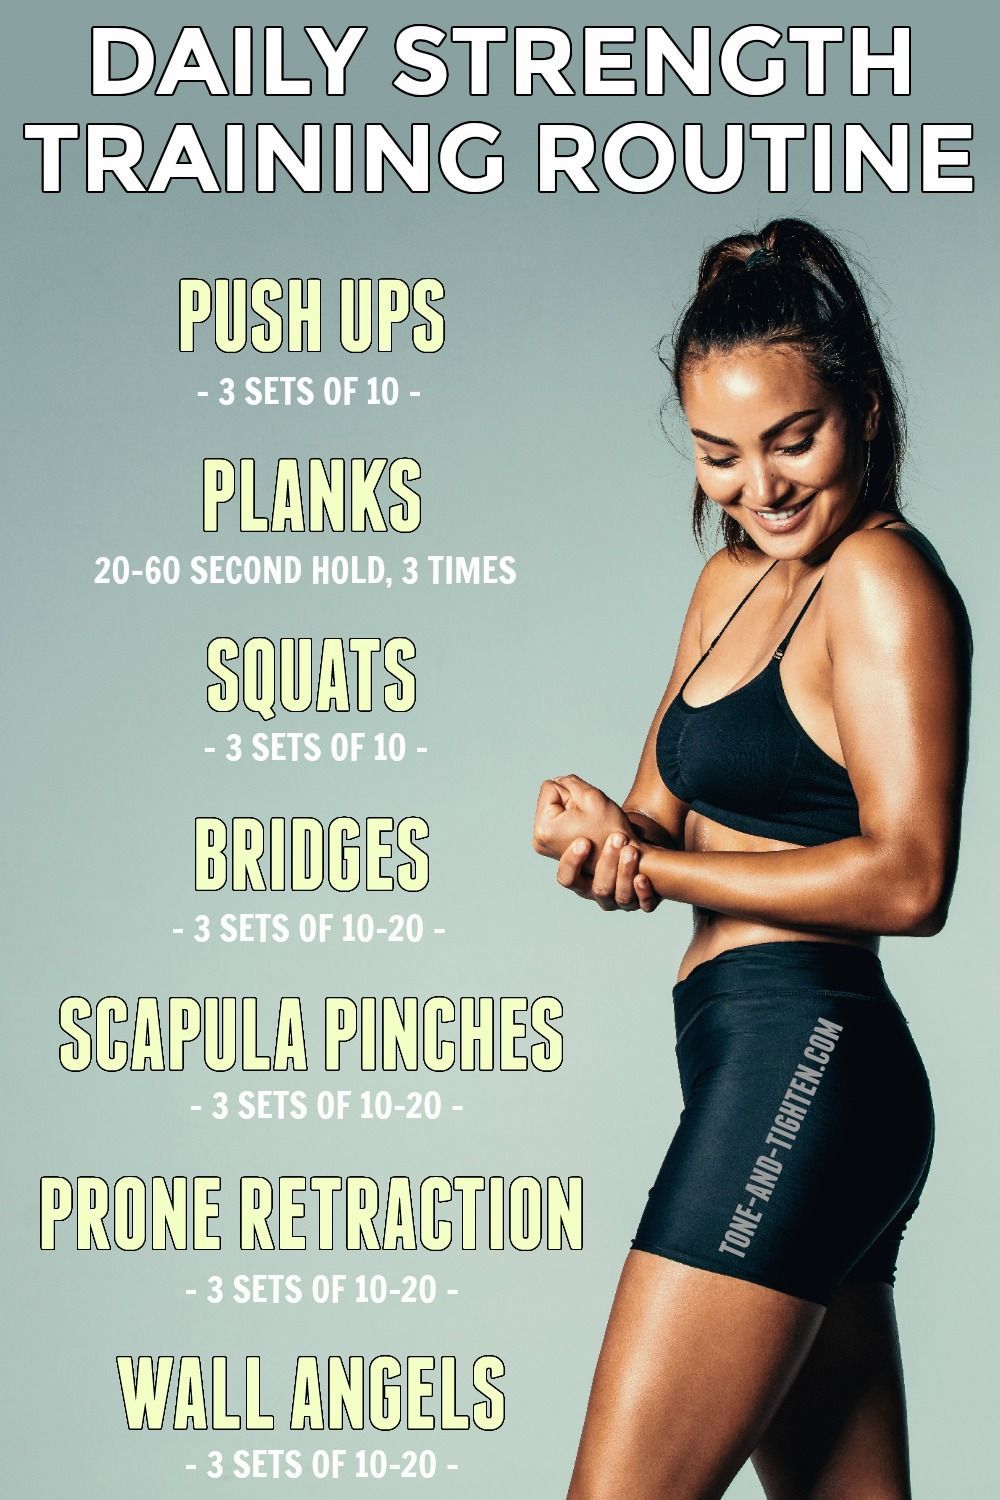 Daily Strength Training Routine - Daily Strength Training Routine -   17 fitness Training routine ideas